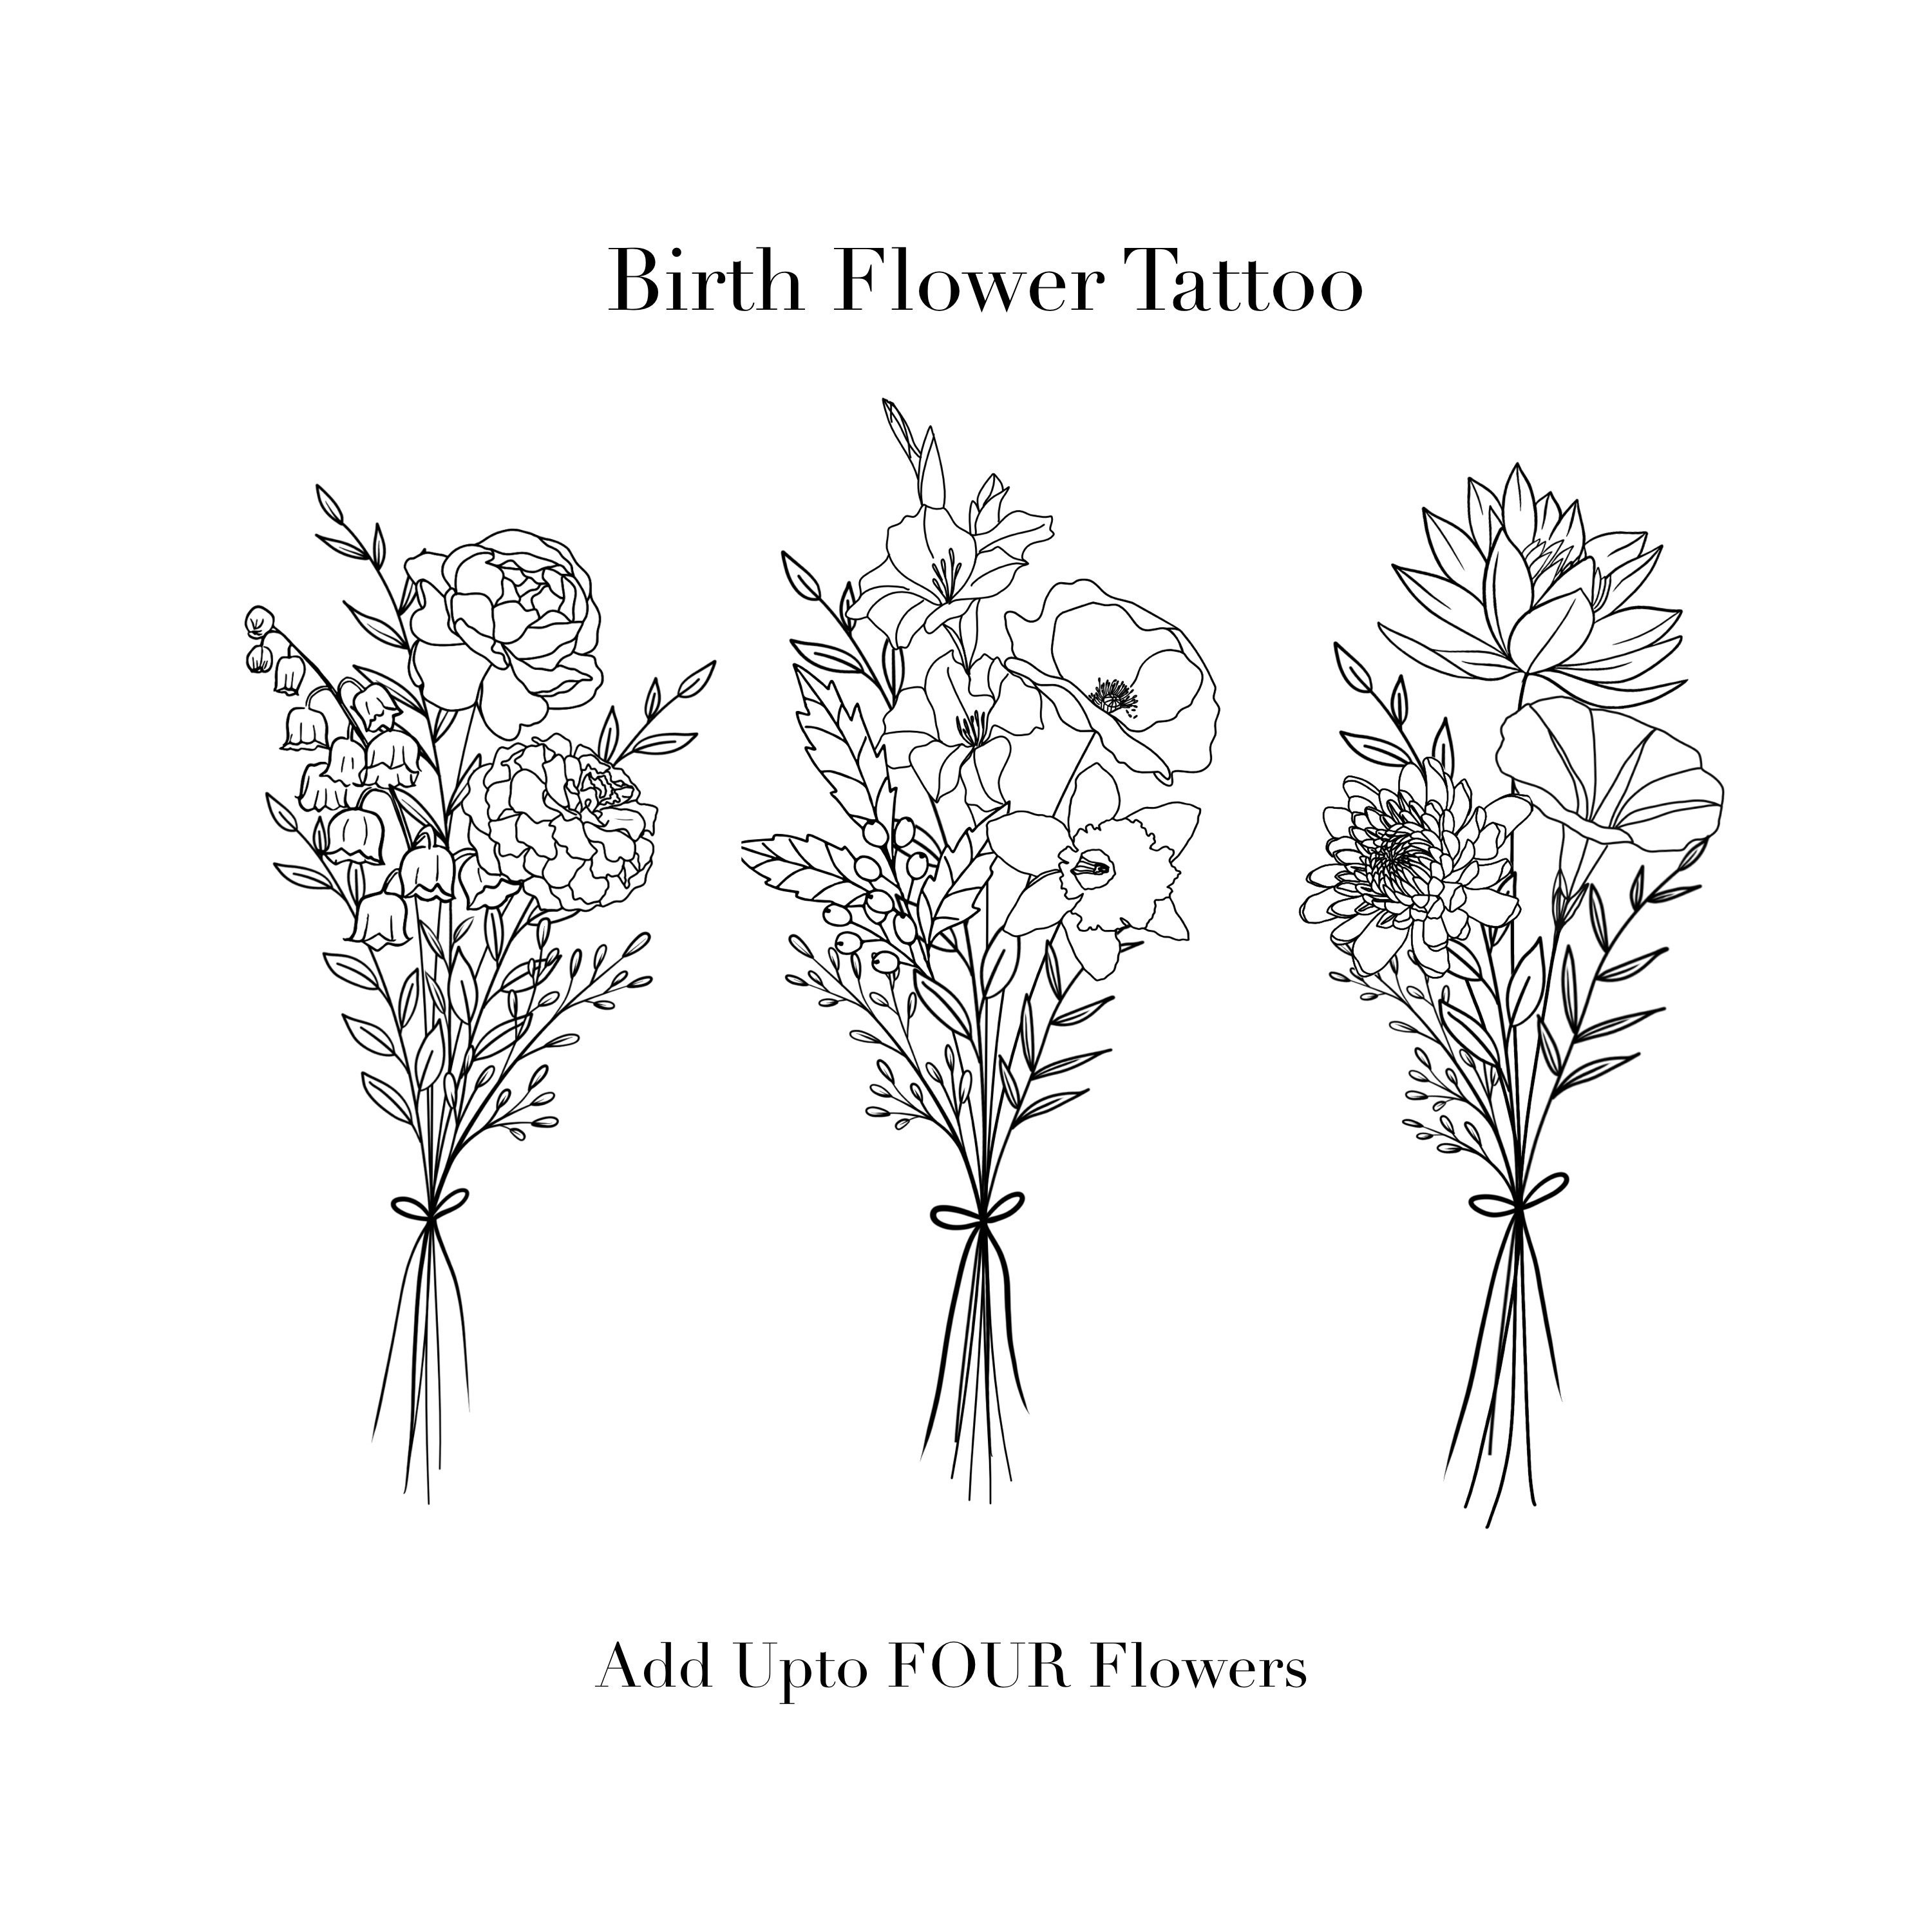 Personalised Embroidered Birth Flower T Shirt By Rock On Ruby  Birth  flower tattoos Flower tattoo sleeve Birth flowers